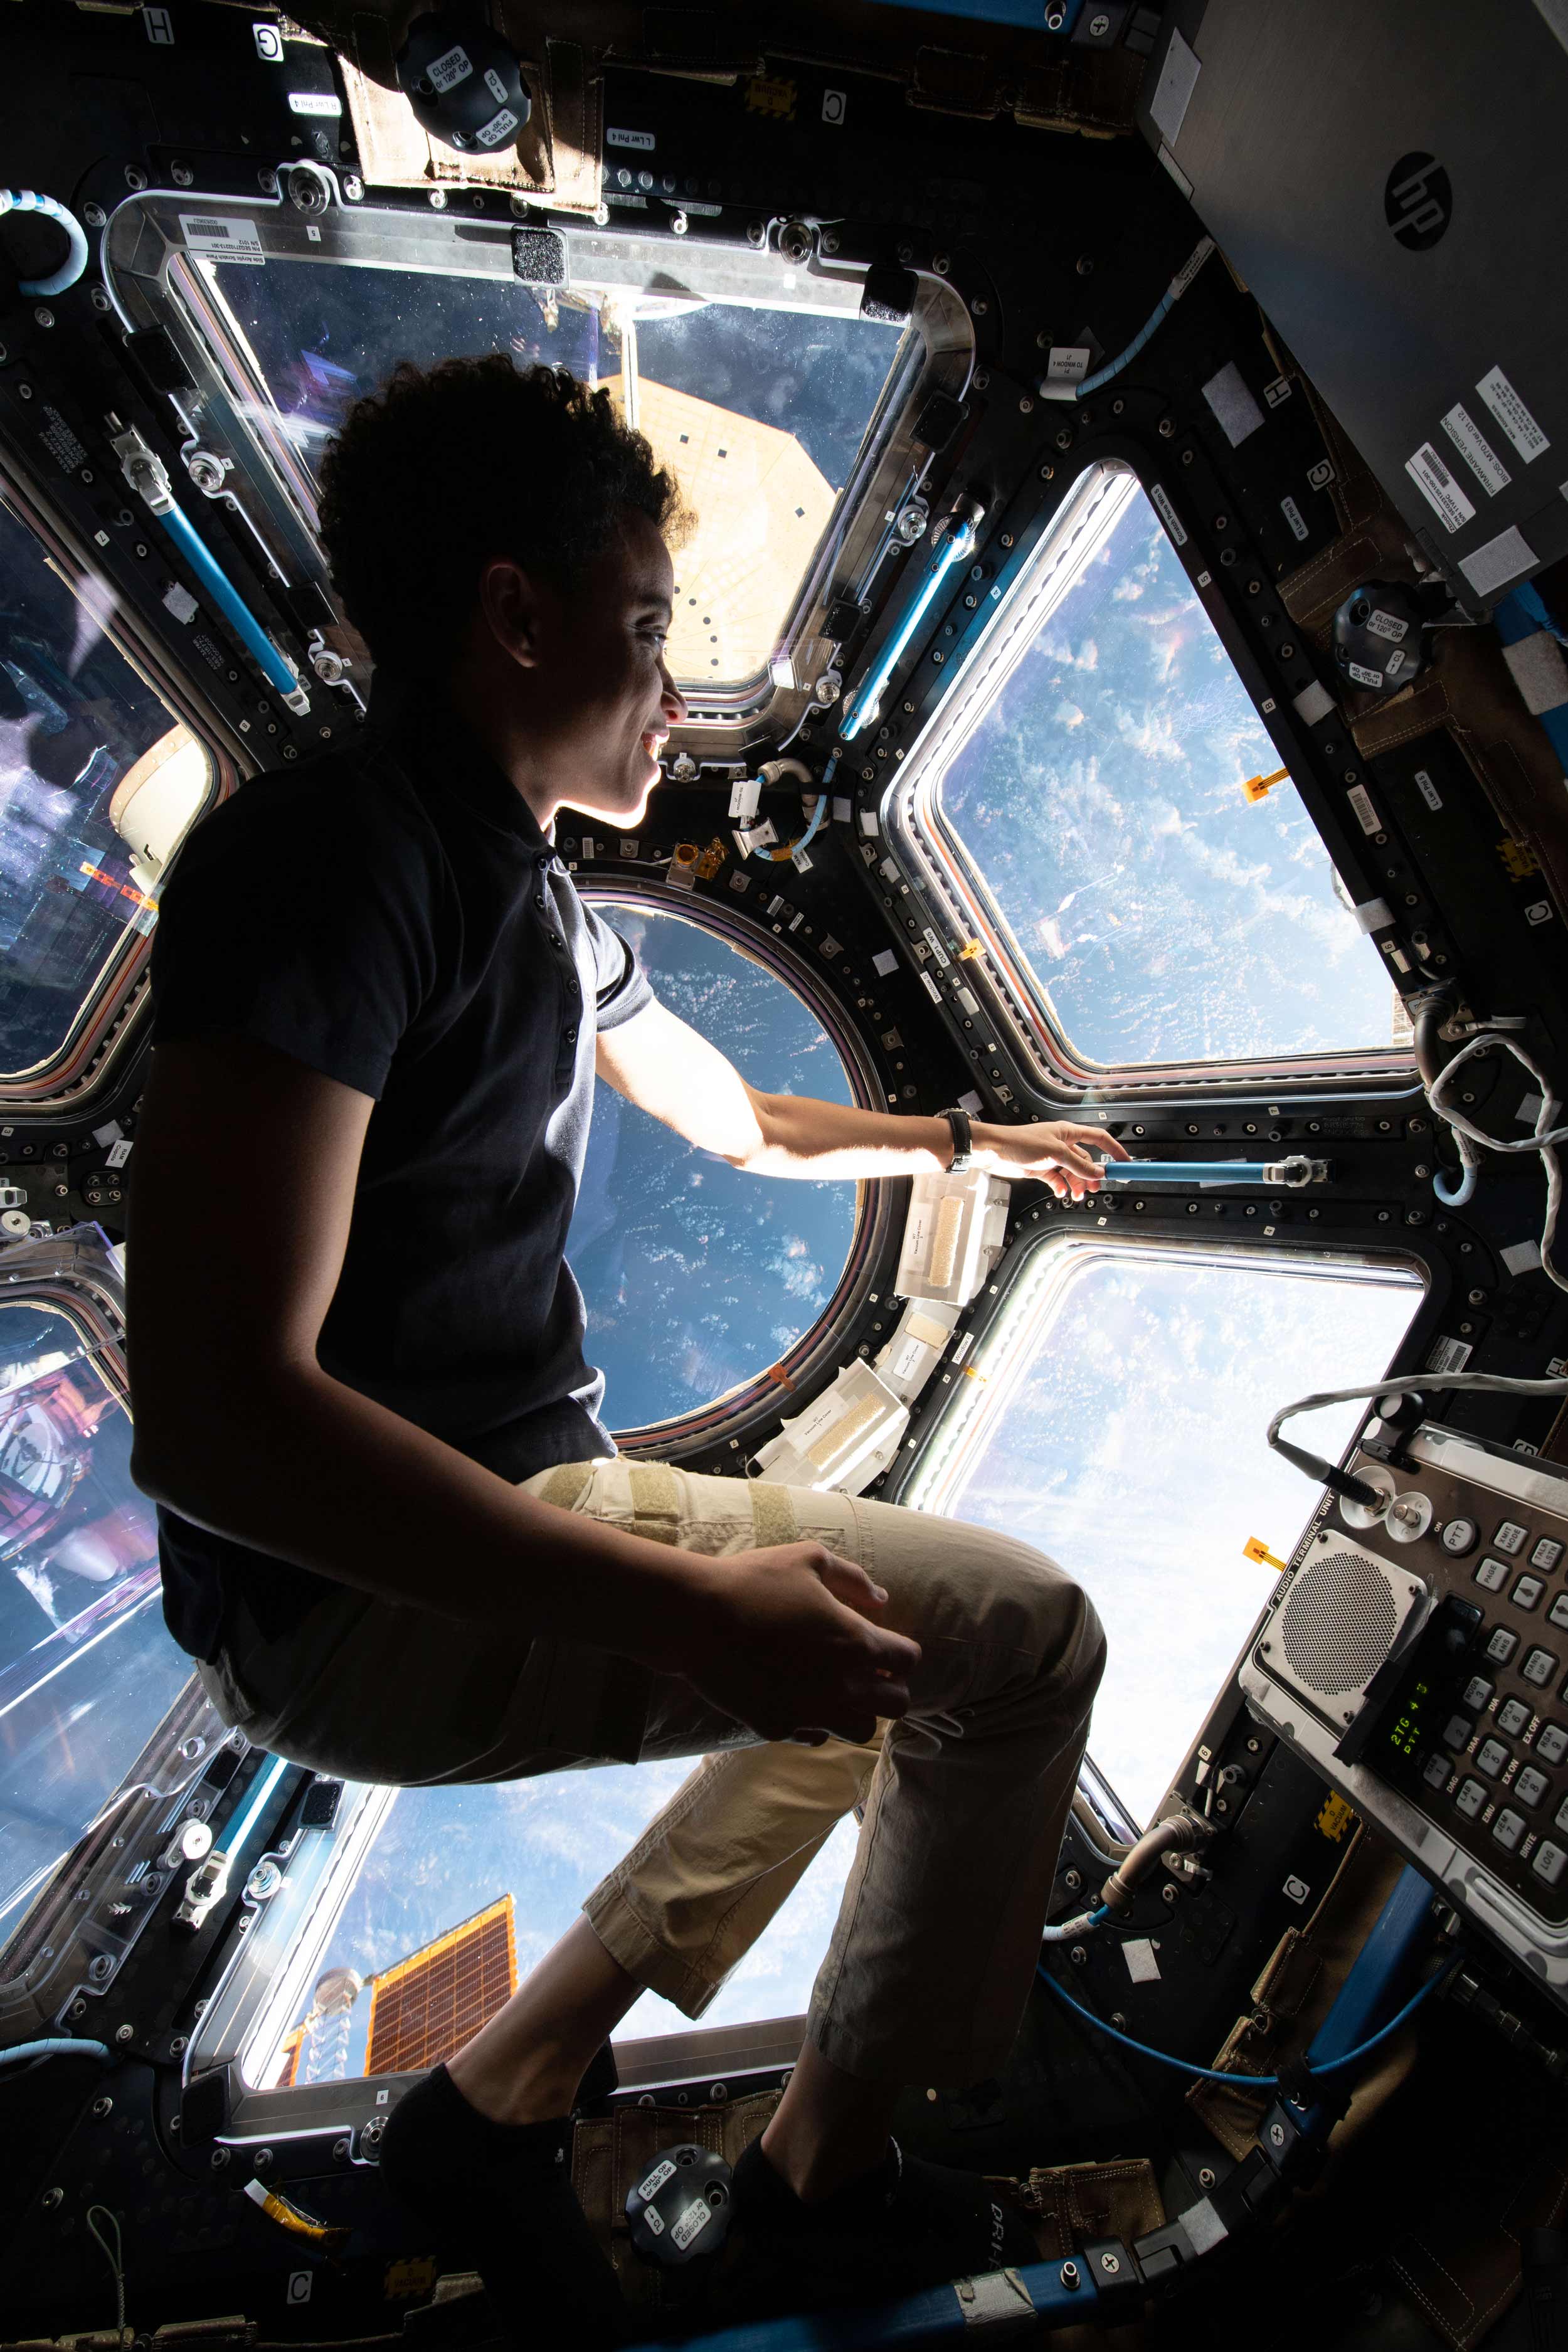 NASA astronaut Jessica Watkins enjoys the view of Earth from inside the International Space Station&#39;s seven-windowed cupola on May 5. Watkins made <a href="https://www.cnn.com/2022/04/27/tech/spacex-launch-crew-4-wednesday-scn/index.html" target="_blank">history</a> as the first Black woman to join the Space Station crew.